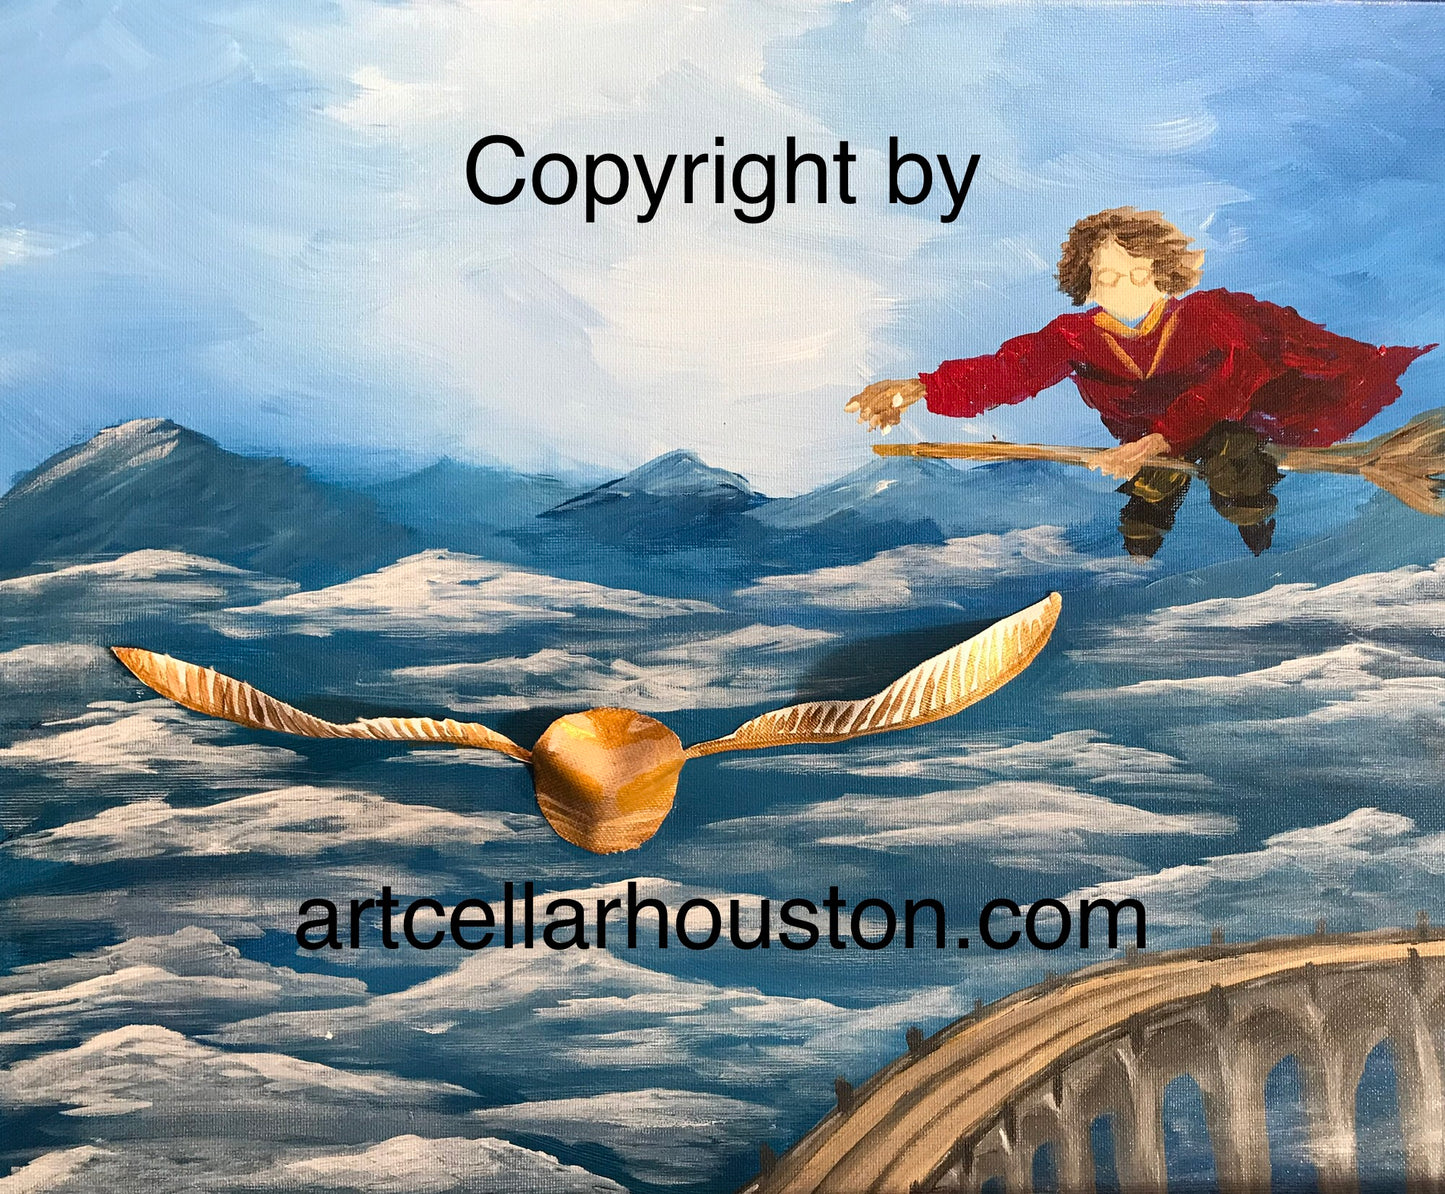 Sat, Jan 8, 1-3pm "Chasing the Snitch" Private Houston Kids Painting Party